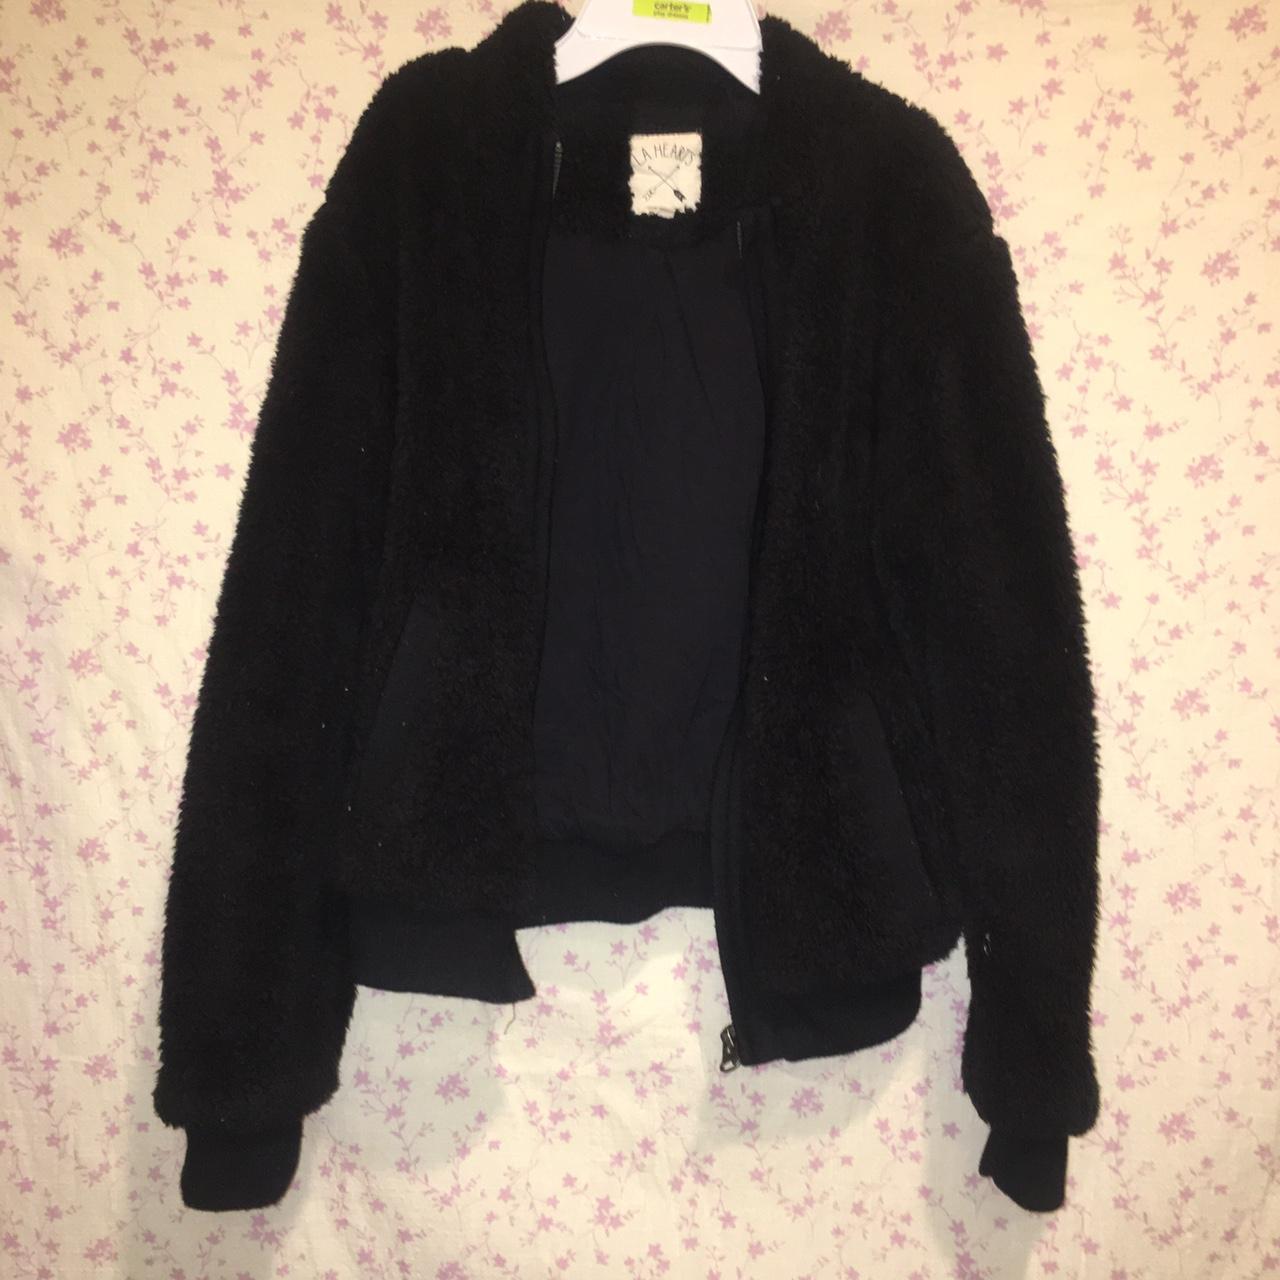 PacSun Cropped Bomber Jacket